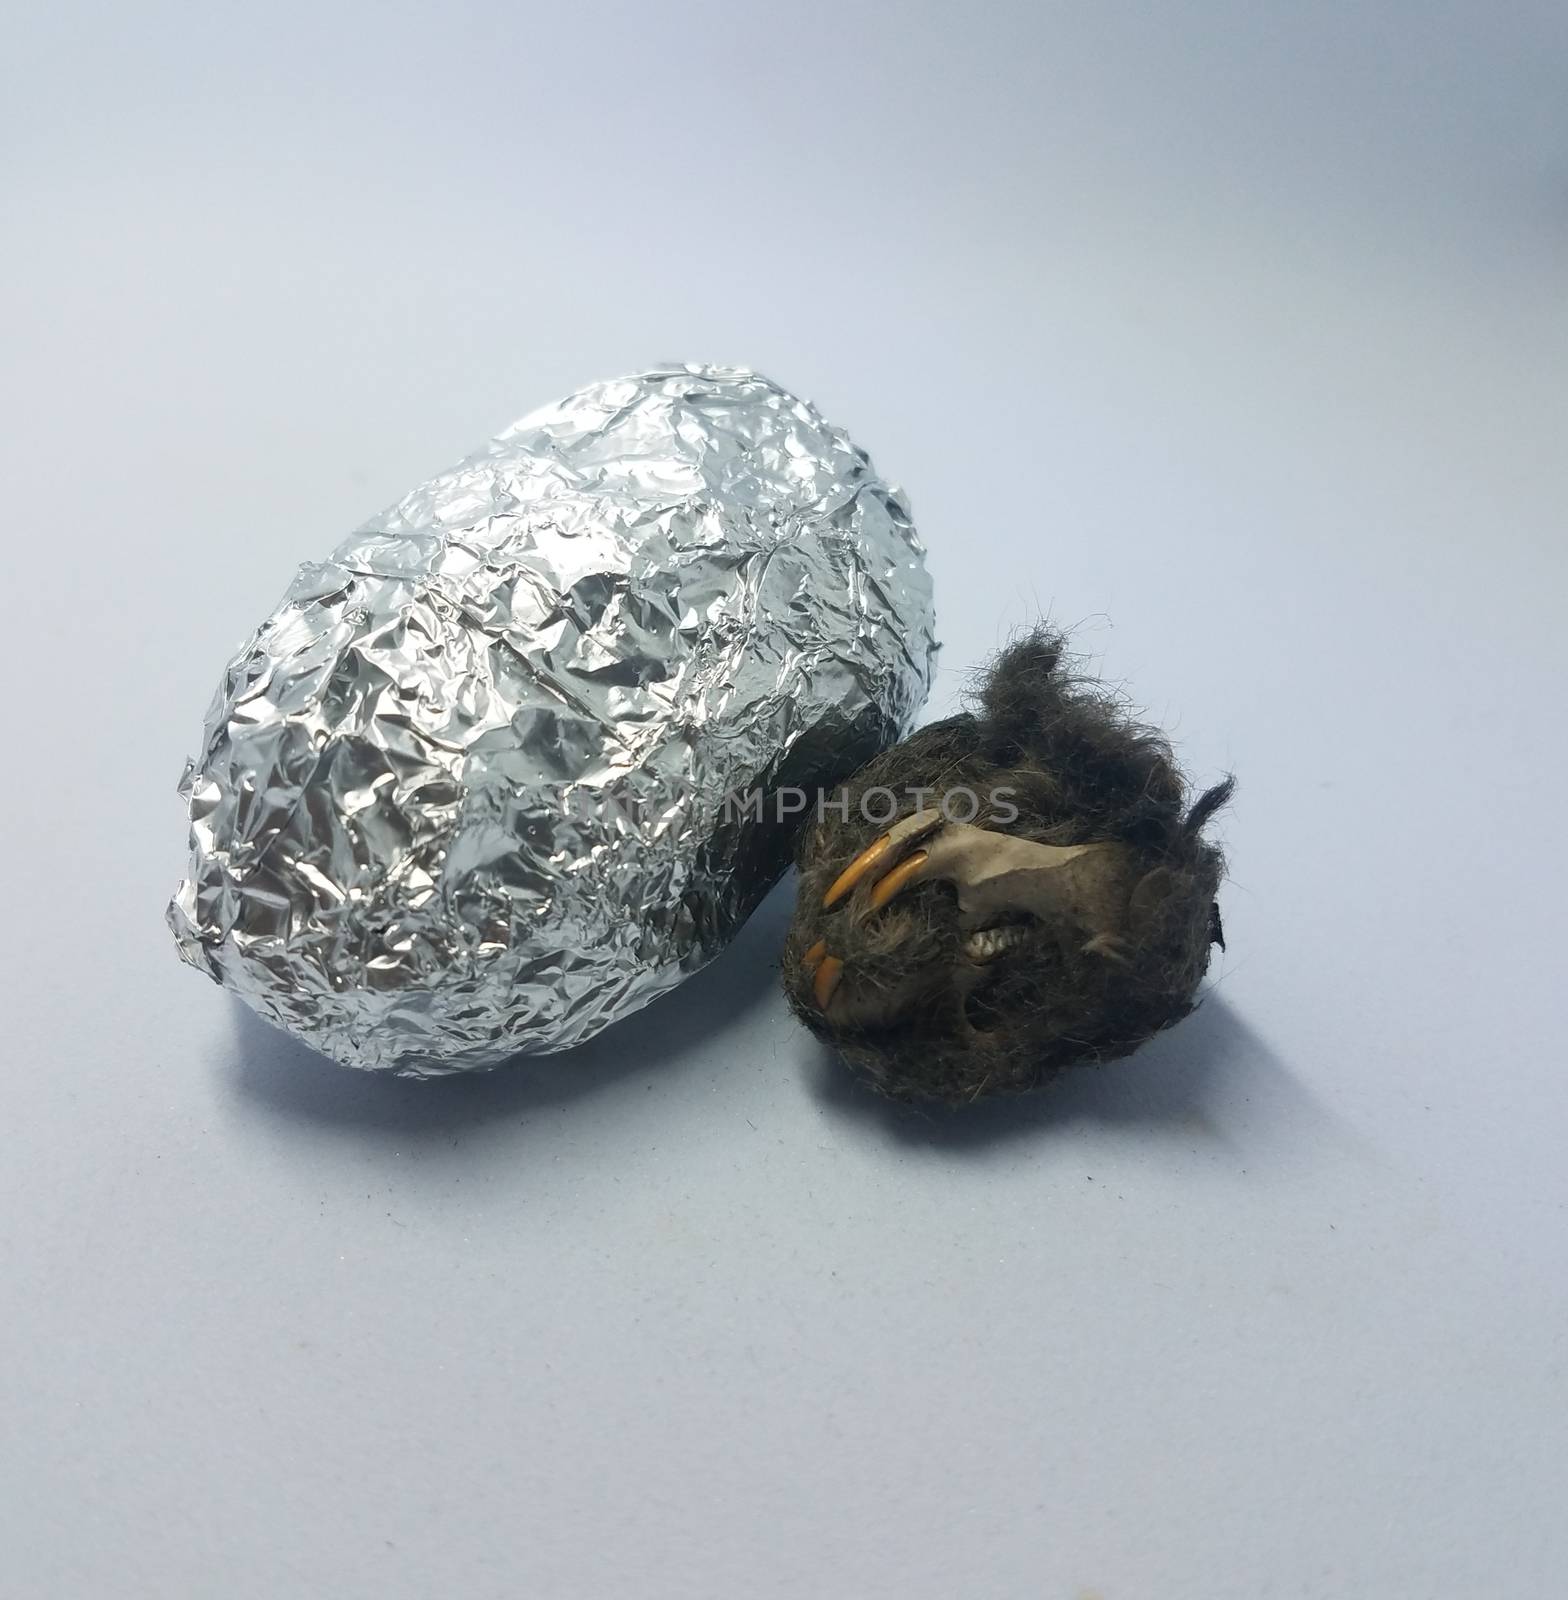 rat skull and object wrapped in foil on white background by stockphotofan1